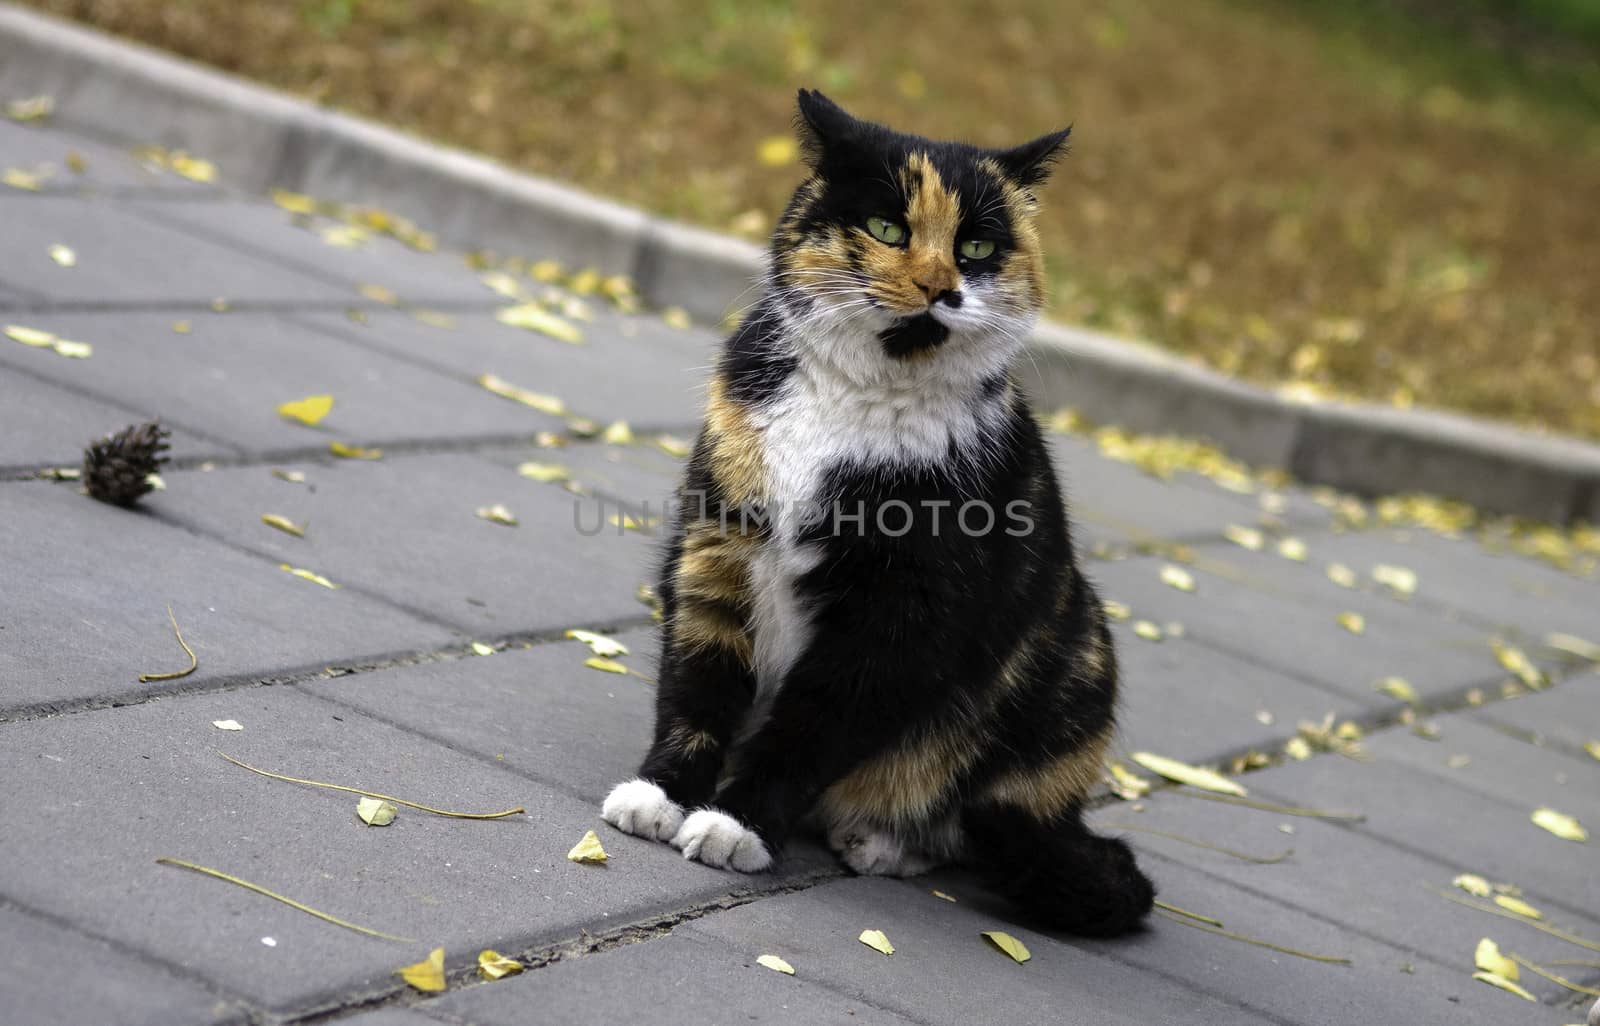 A stray cat in Ditan temple of Beijing, China.